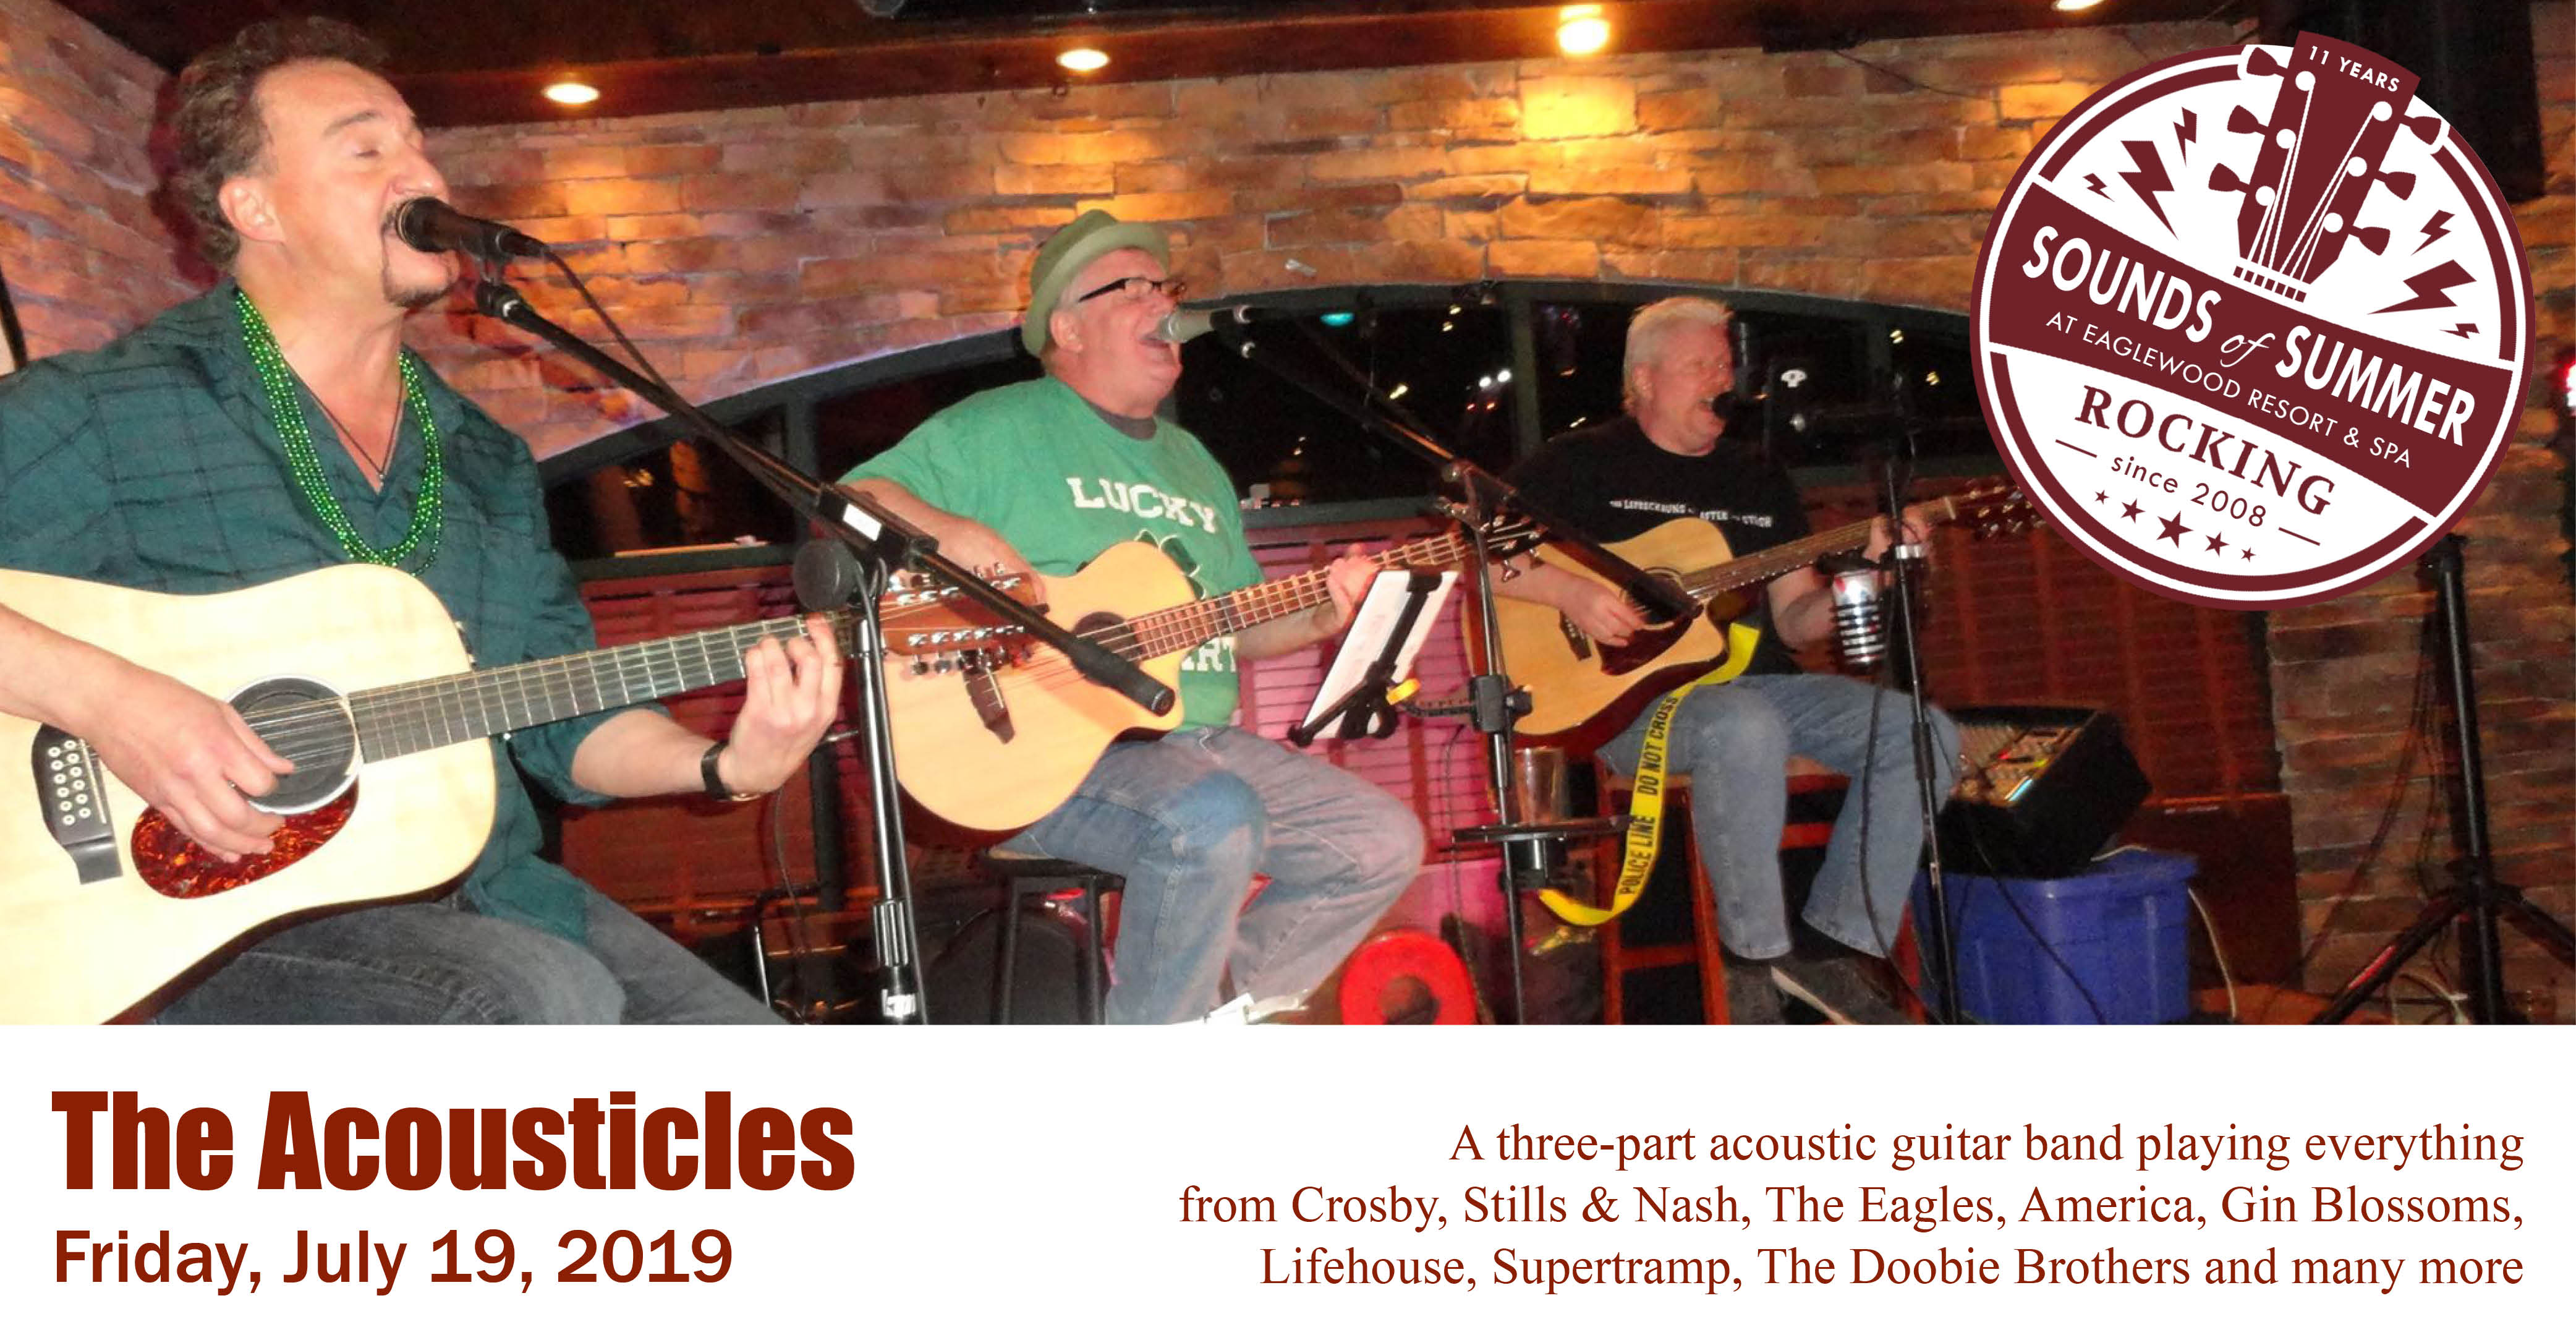 The Acoustiholics_Sounds of Summer at Eaglewood Resort and Spa, July 19, 2019